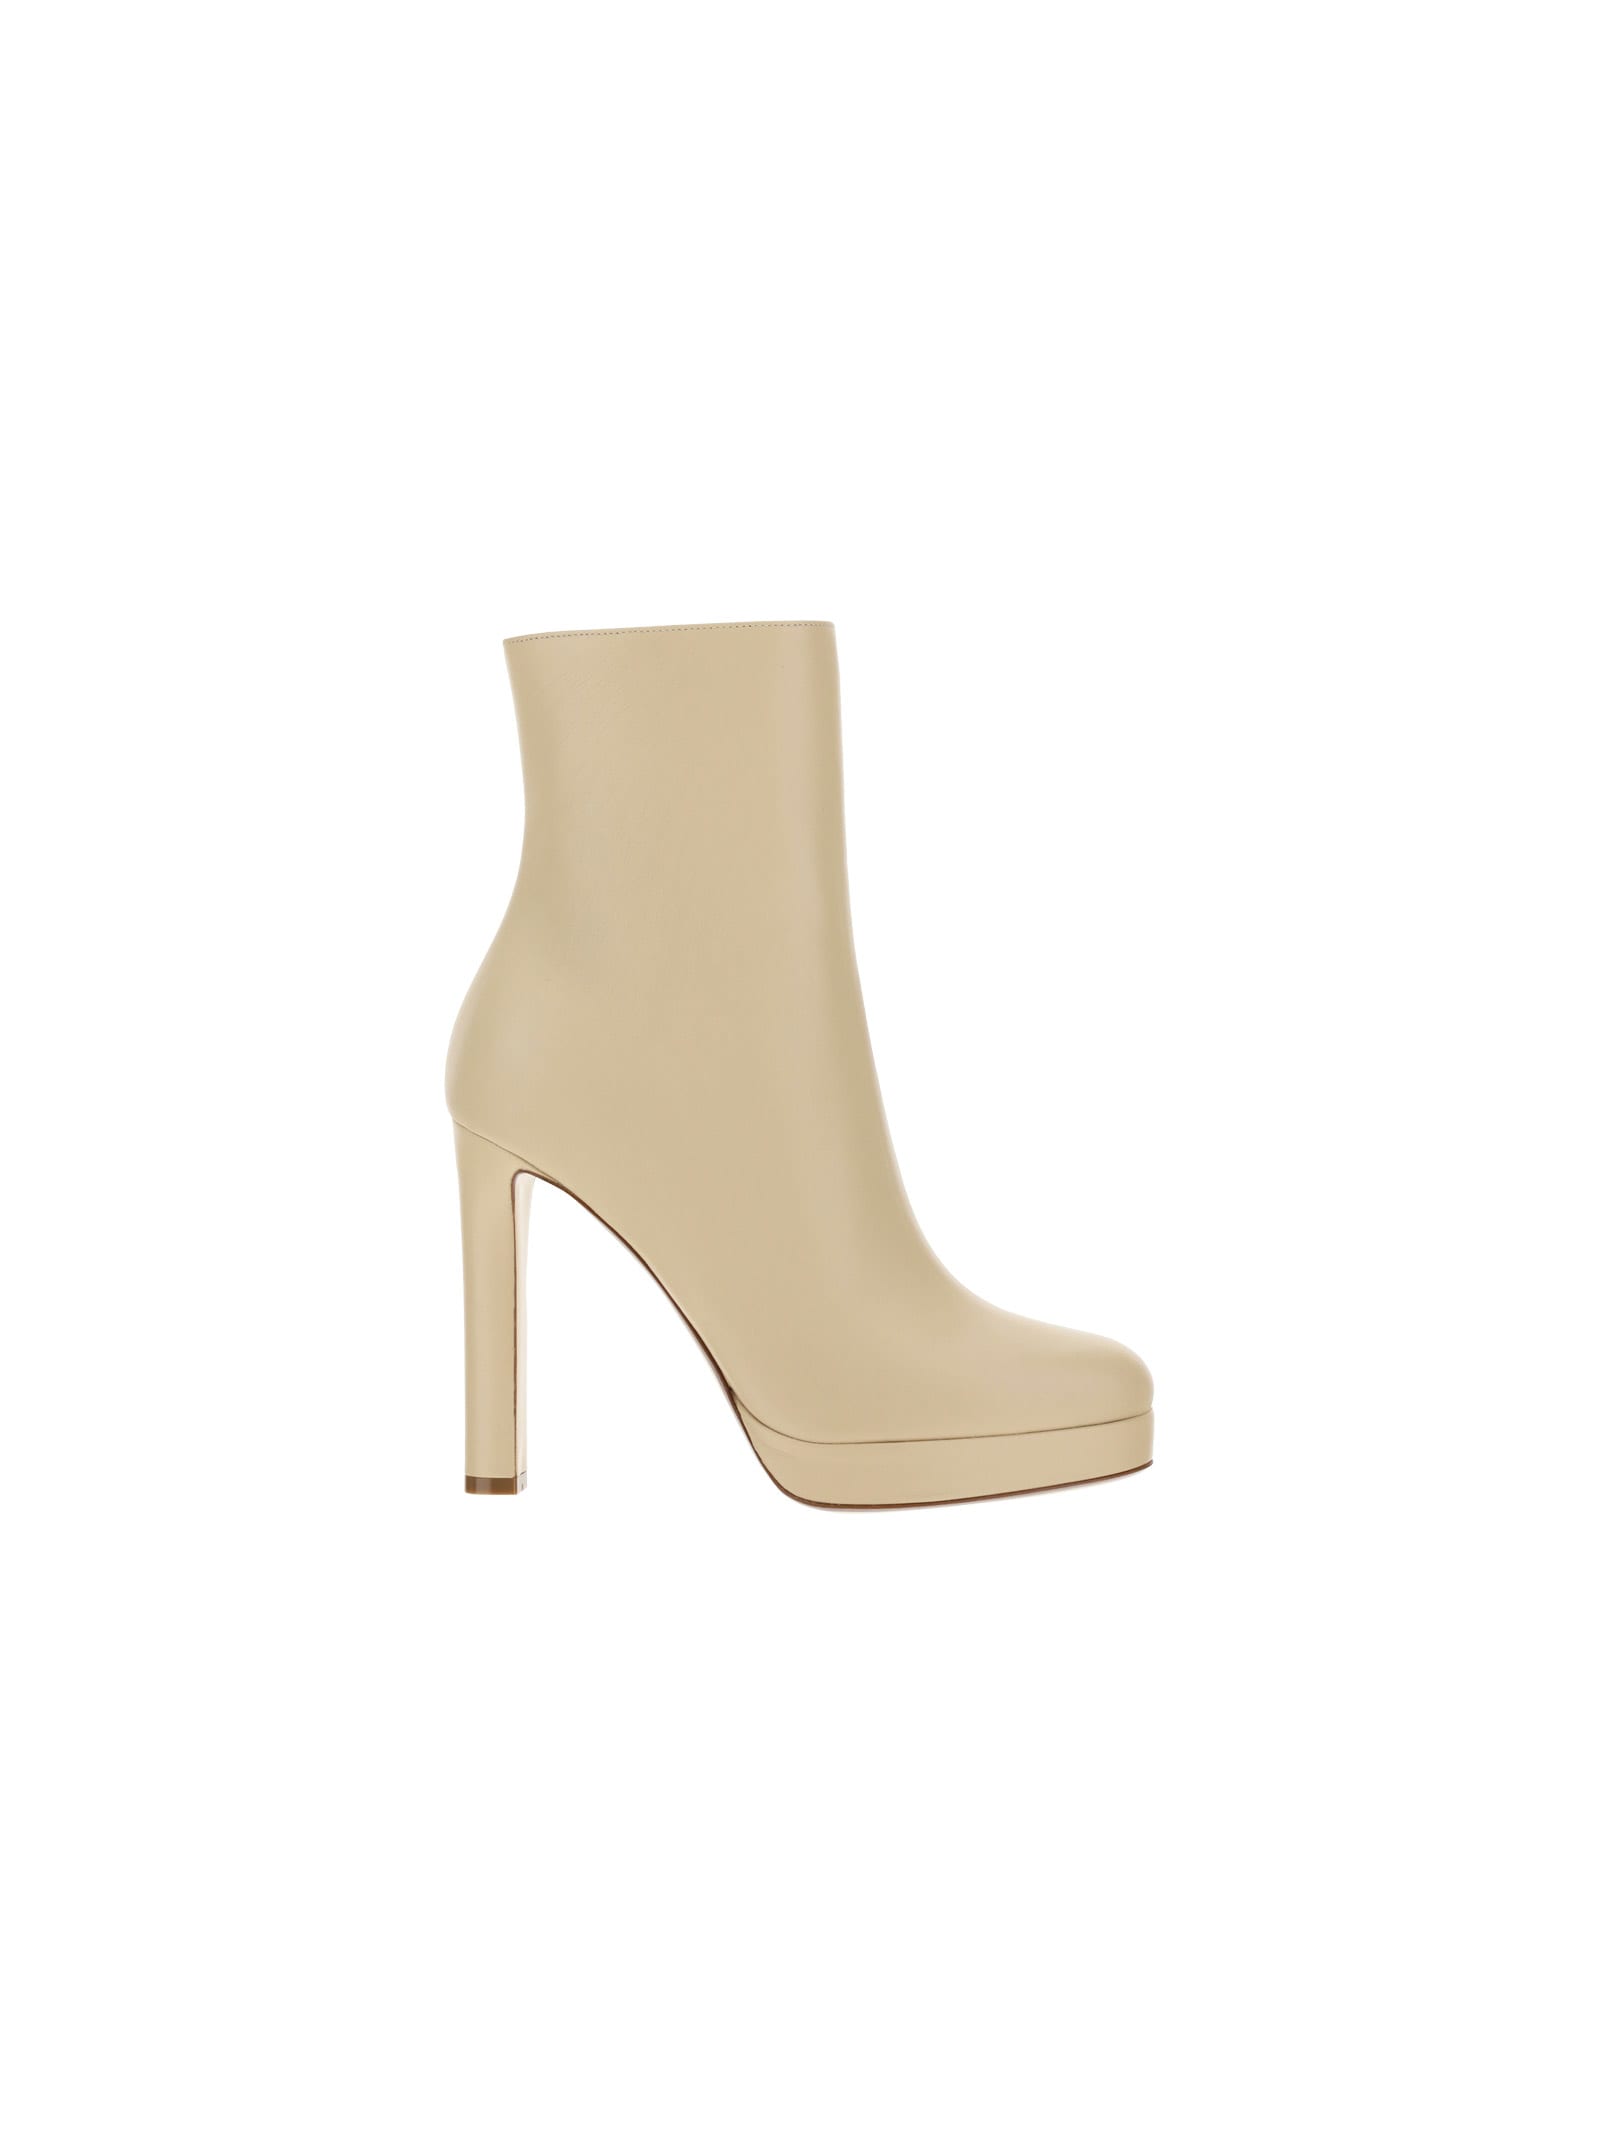 Francesco Russo Heeled Ankle Boots